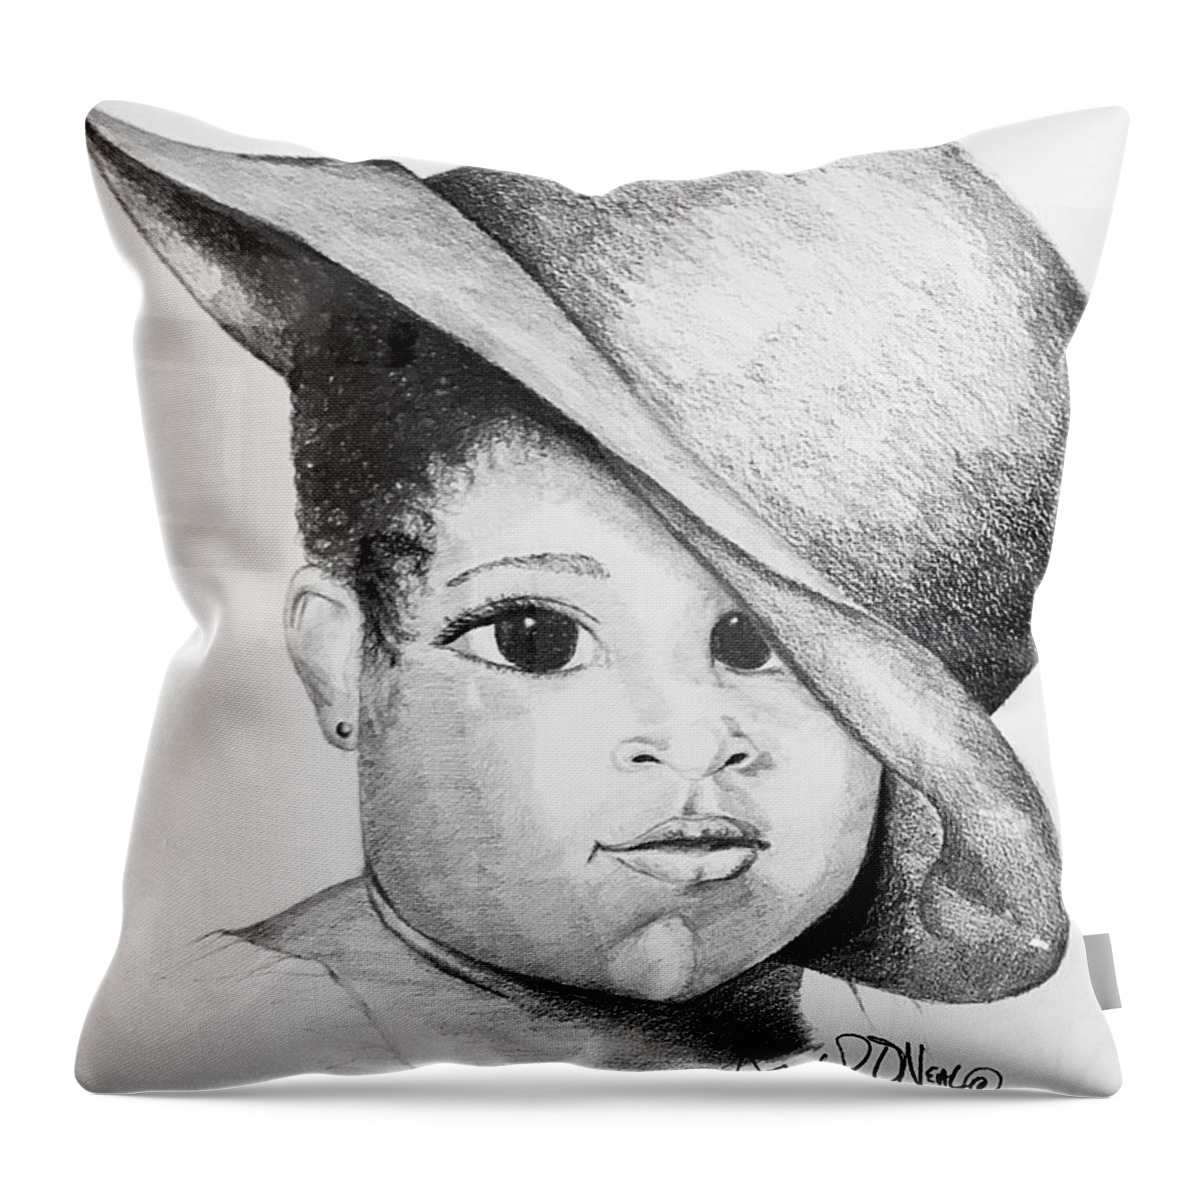  Throw Pillow featuring the drawing Lady by Angie ONeal